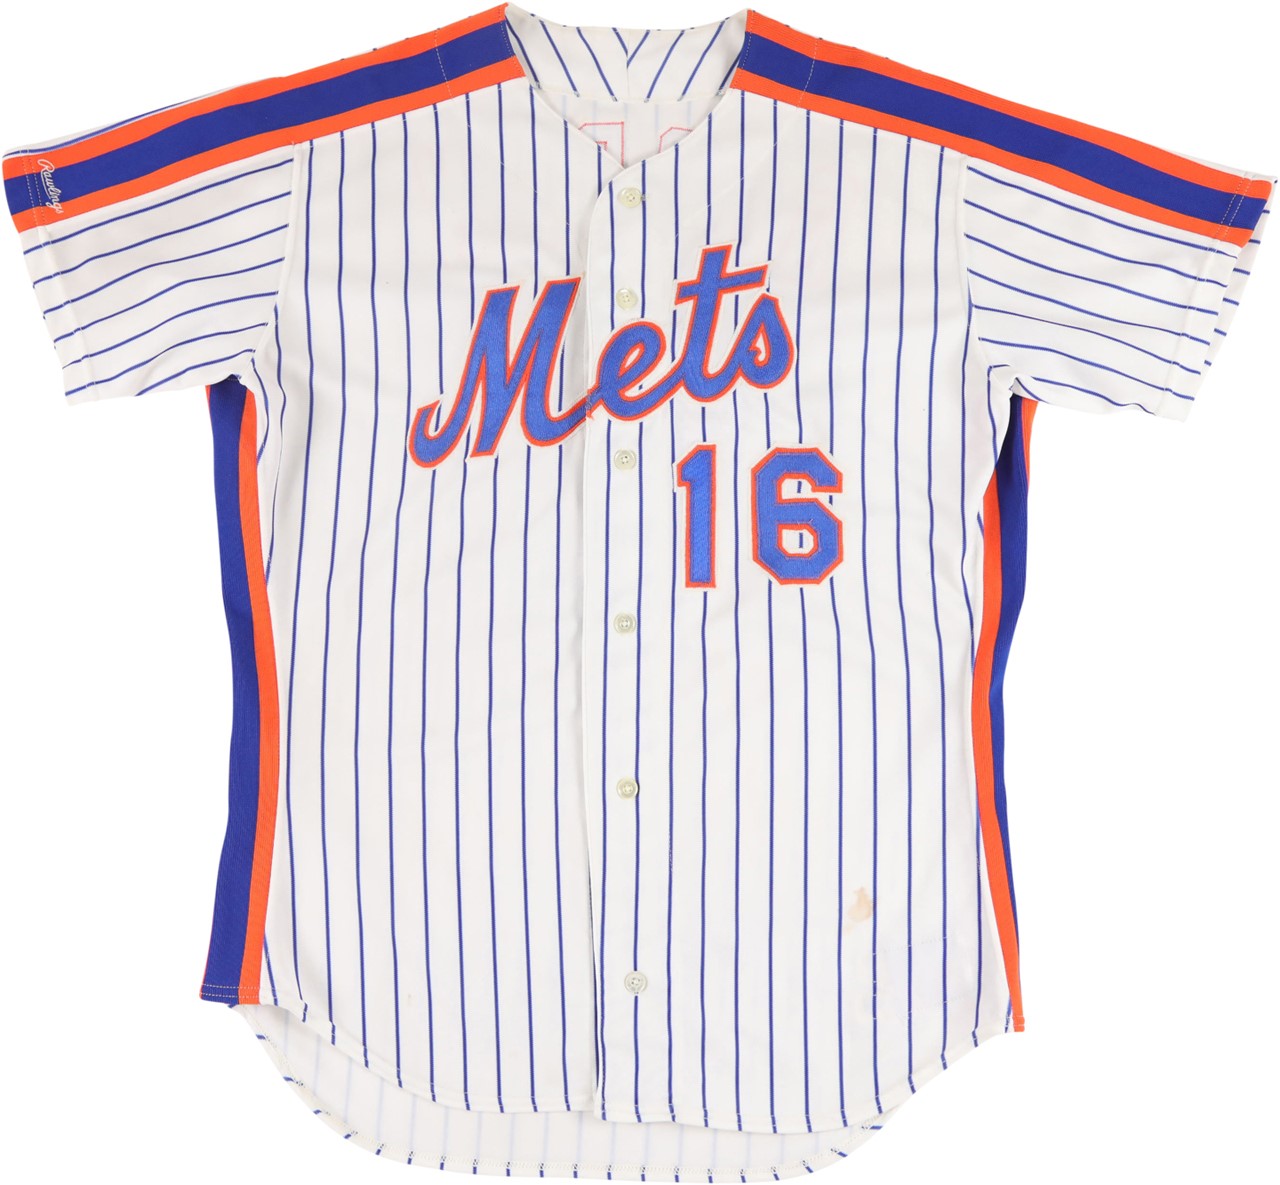 7/21/91 Dwight Gooden New York Mets Signed Game Worn Jersey - 10th Win of the Season and 2 RBI (Photo-Matched)